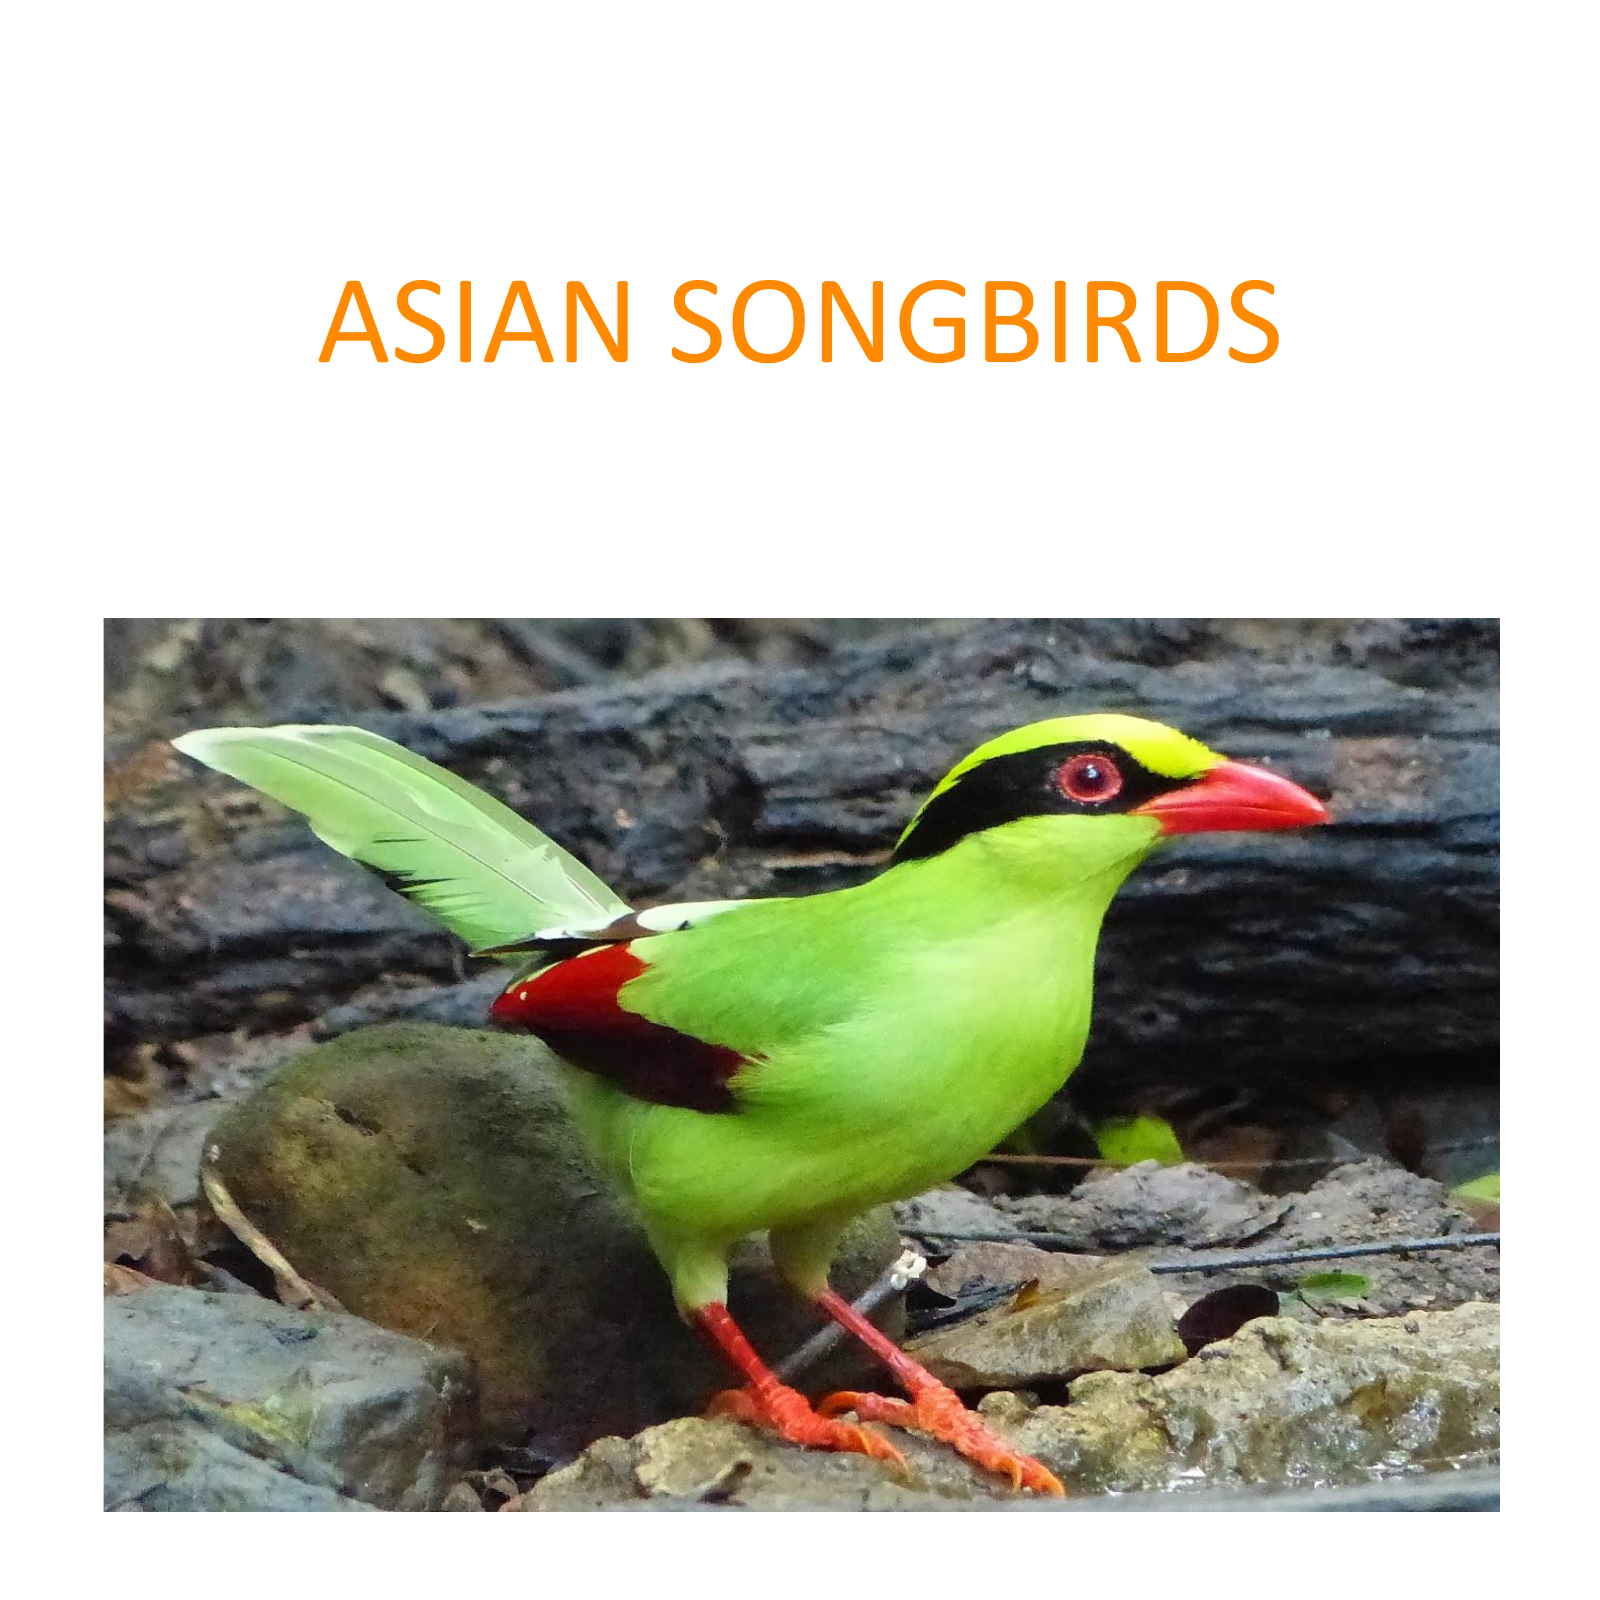 Asian songbirds conservation project